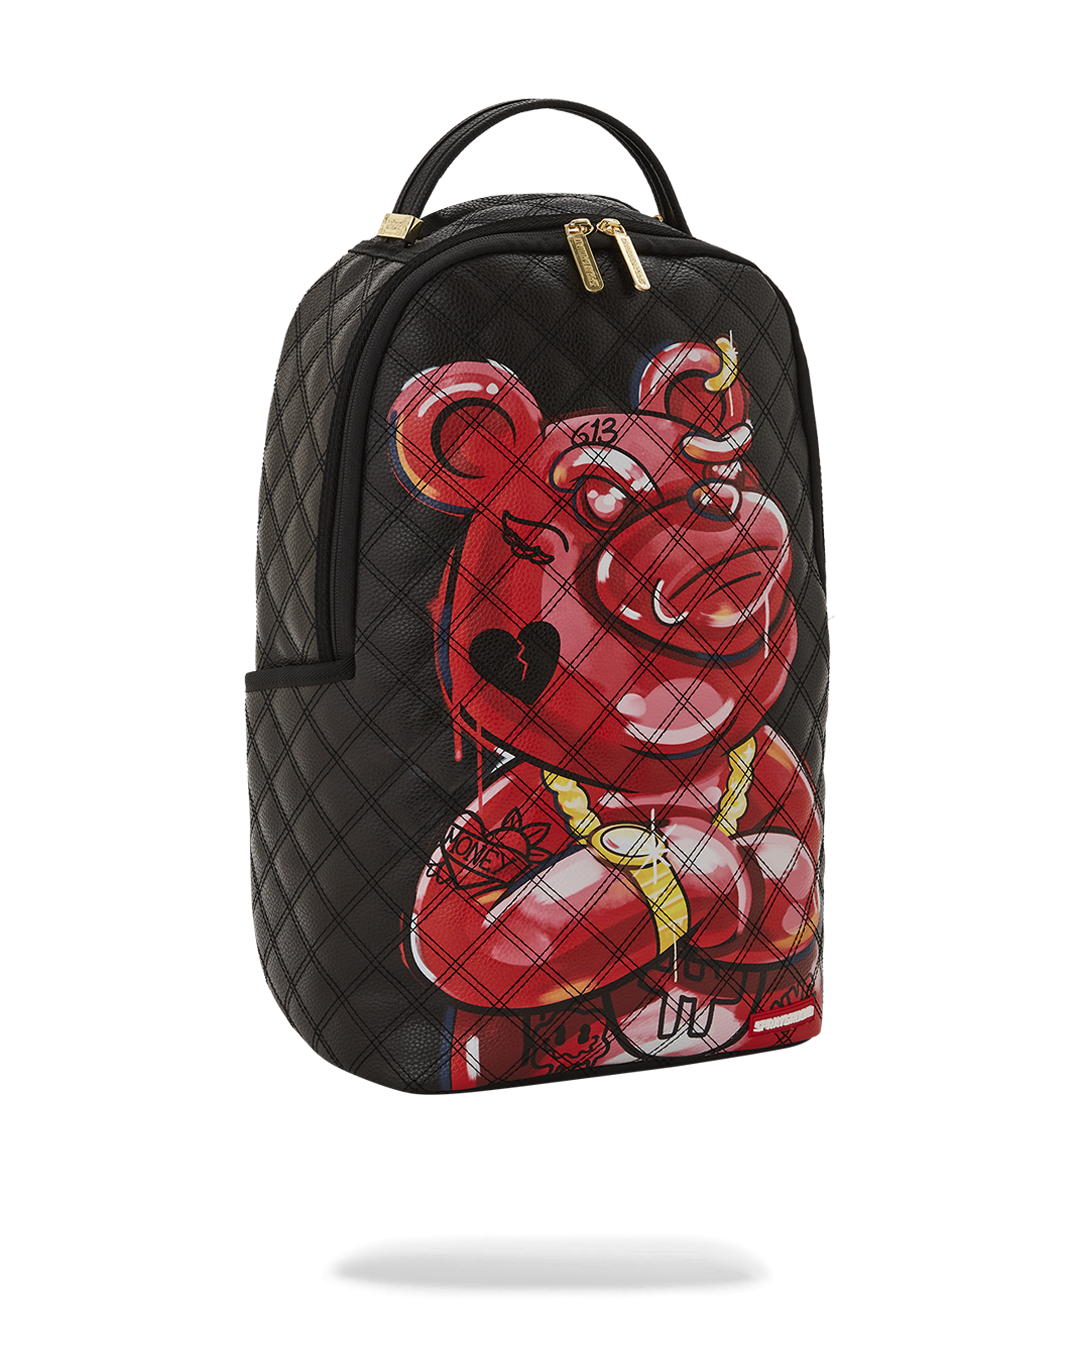 DIABLO PAINTED BEAR QUILTED DLXVF BACKPACK